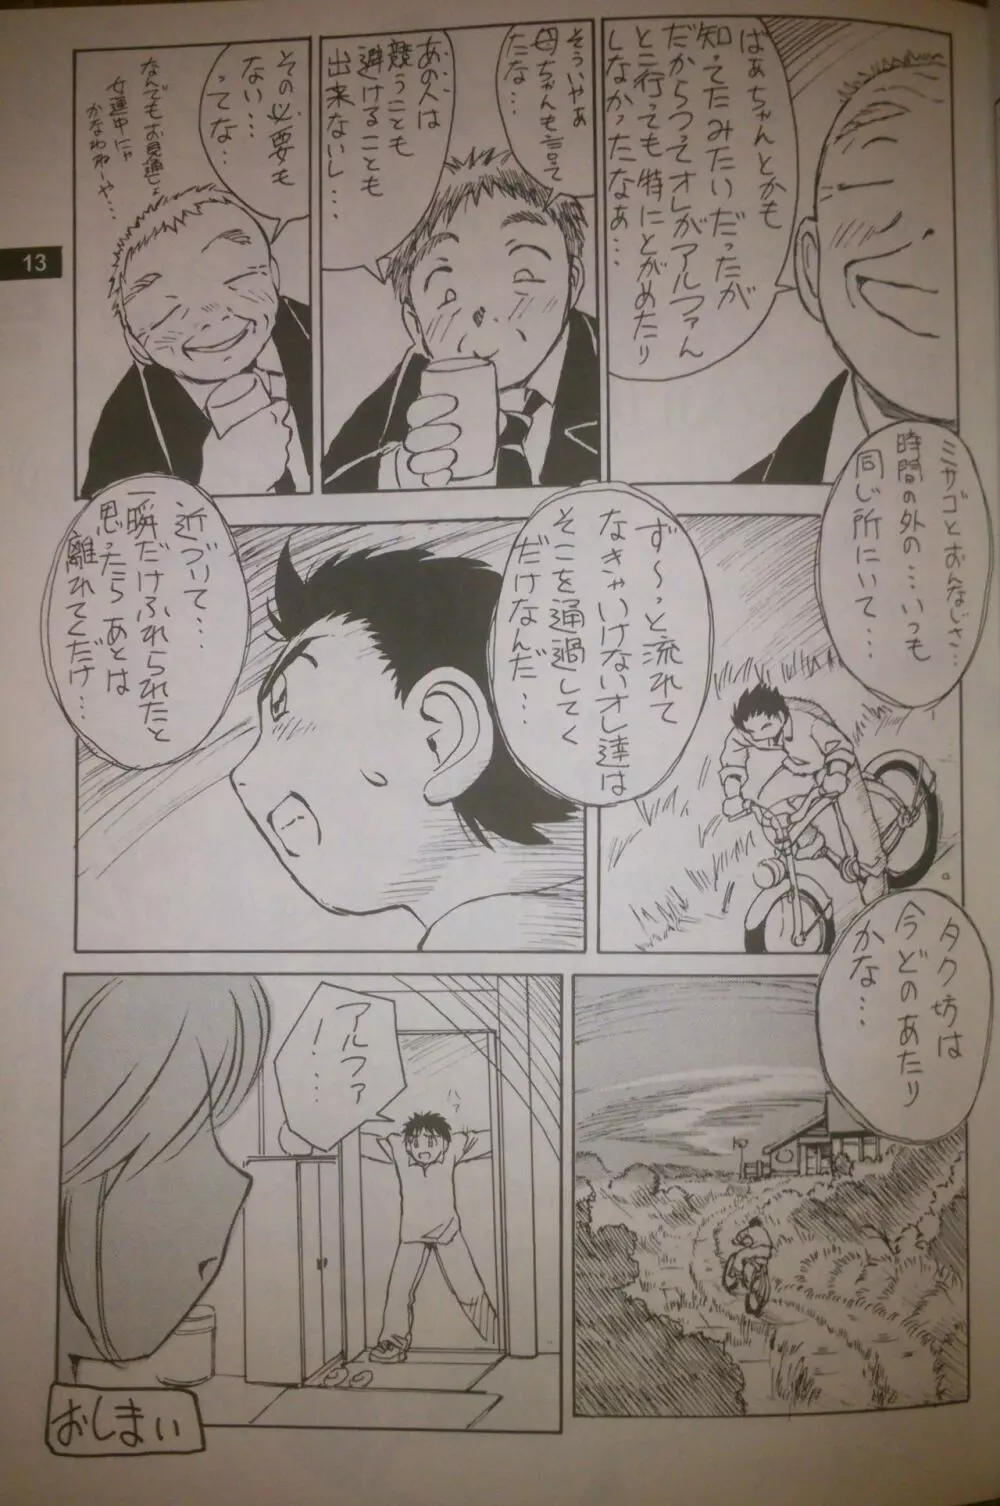 Artifitial Humanity 探求者 Vol.2 Page.14